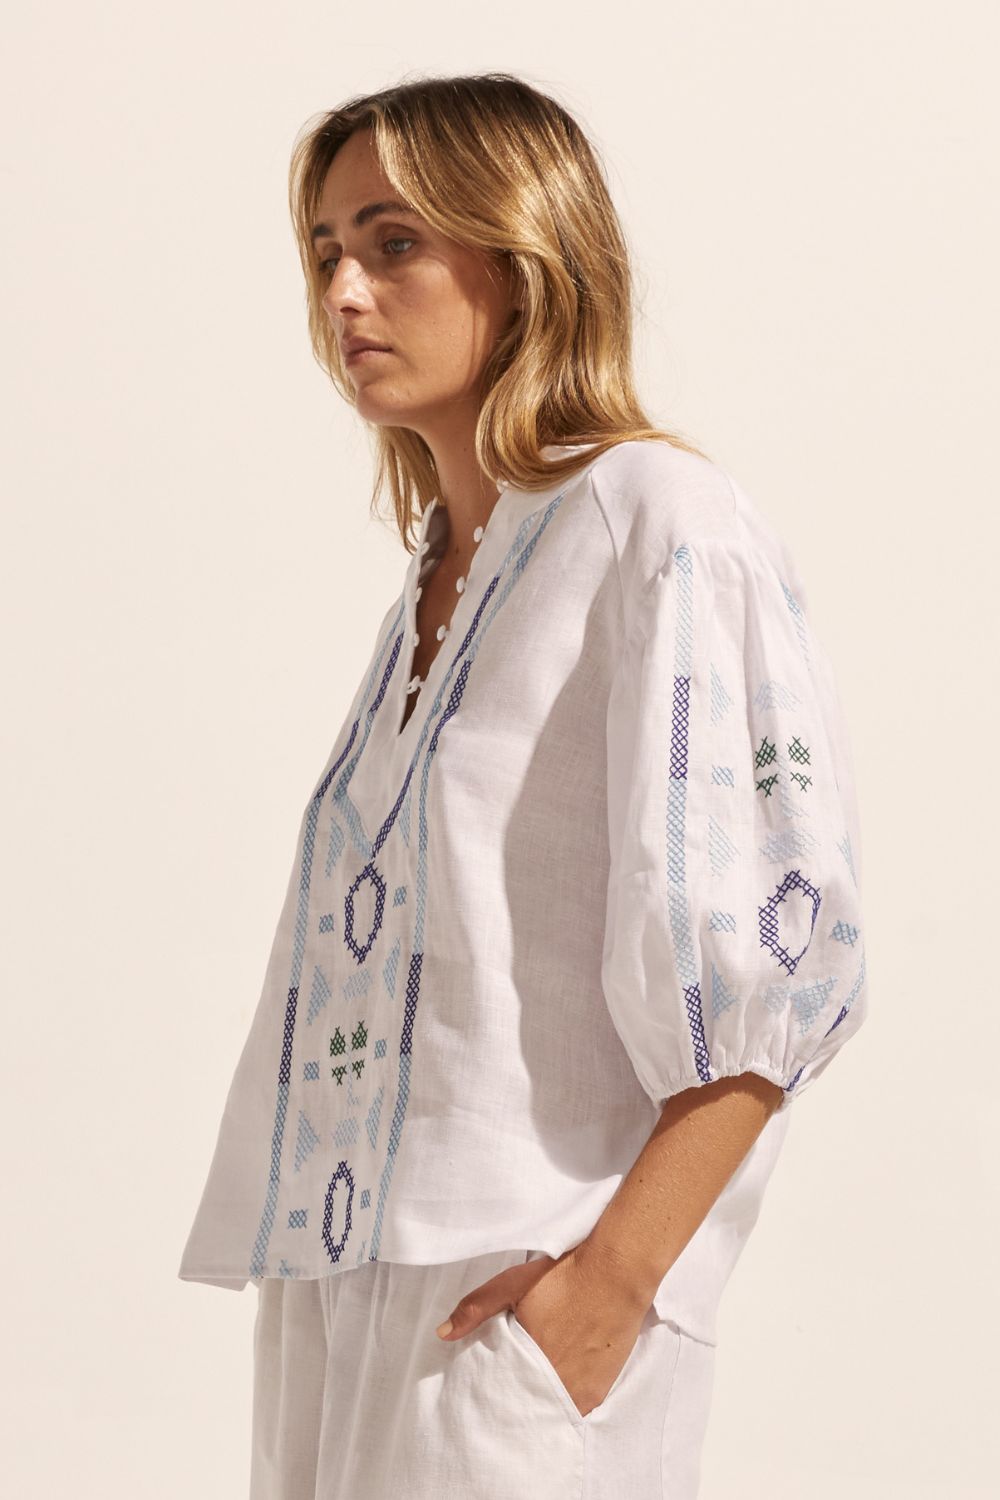 blue and white, top, mid length sleeve, button down neckline, embroidered, side image